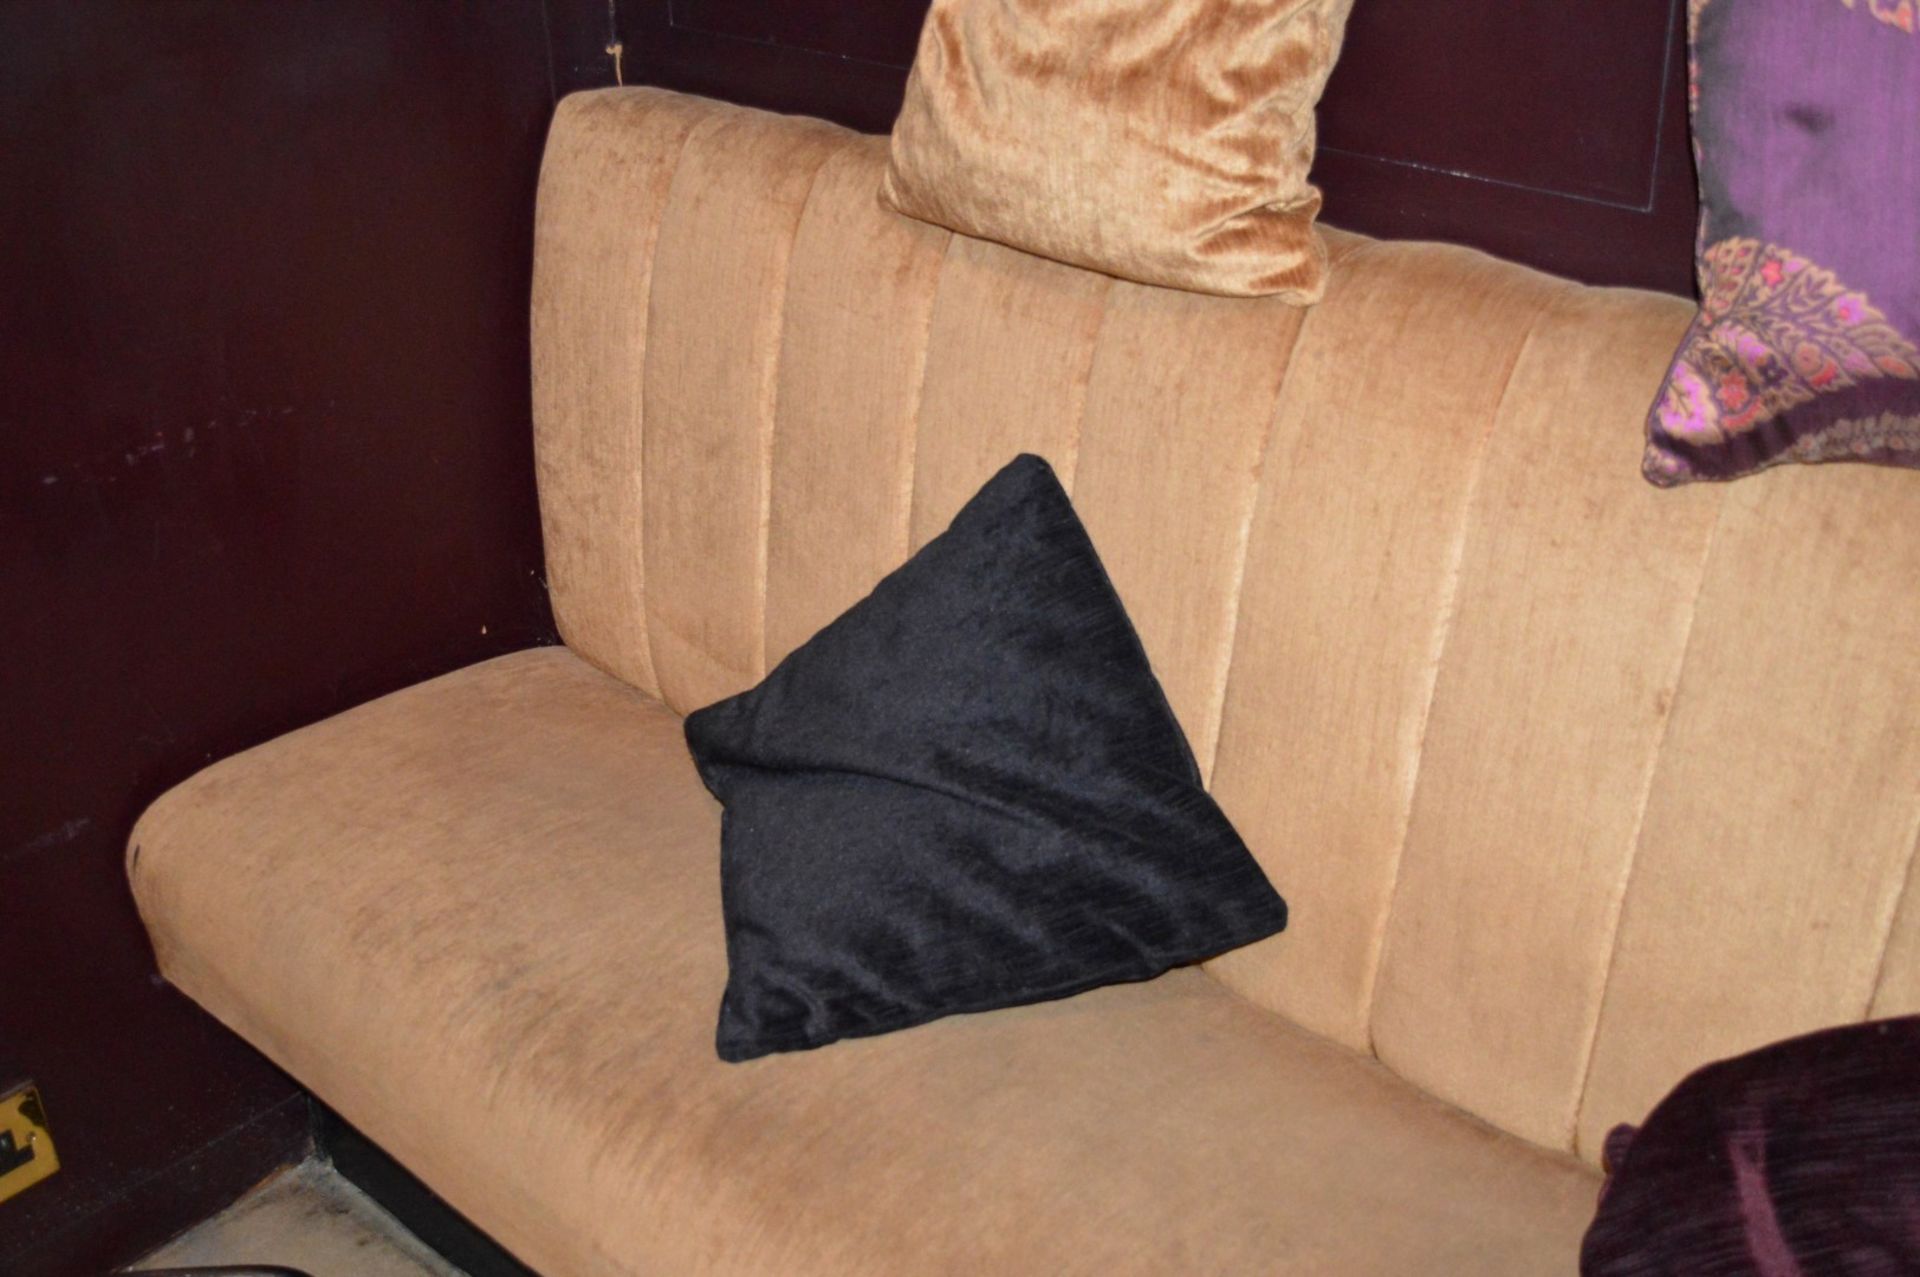 1 x High Back Seating Booth - Upholstered in Golden Fabric - CL180 - Includes 4 Cushions - Ref IC285 - Image 2 of 4